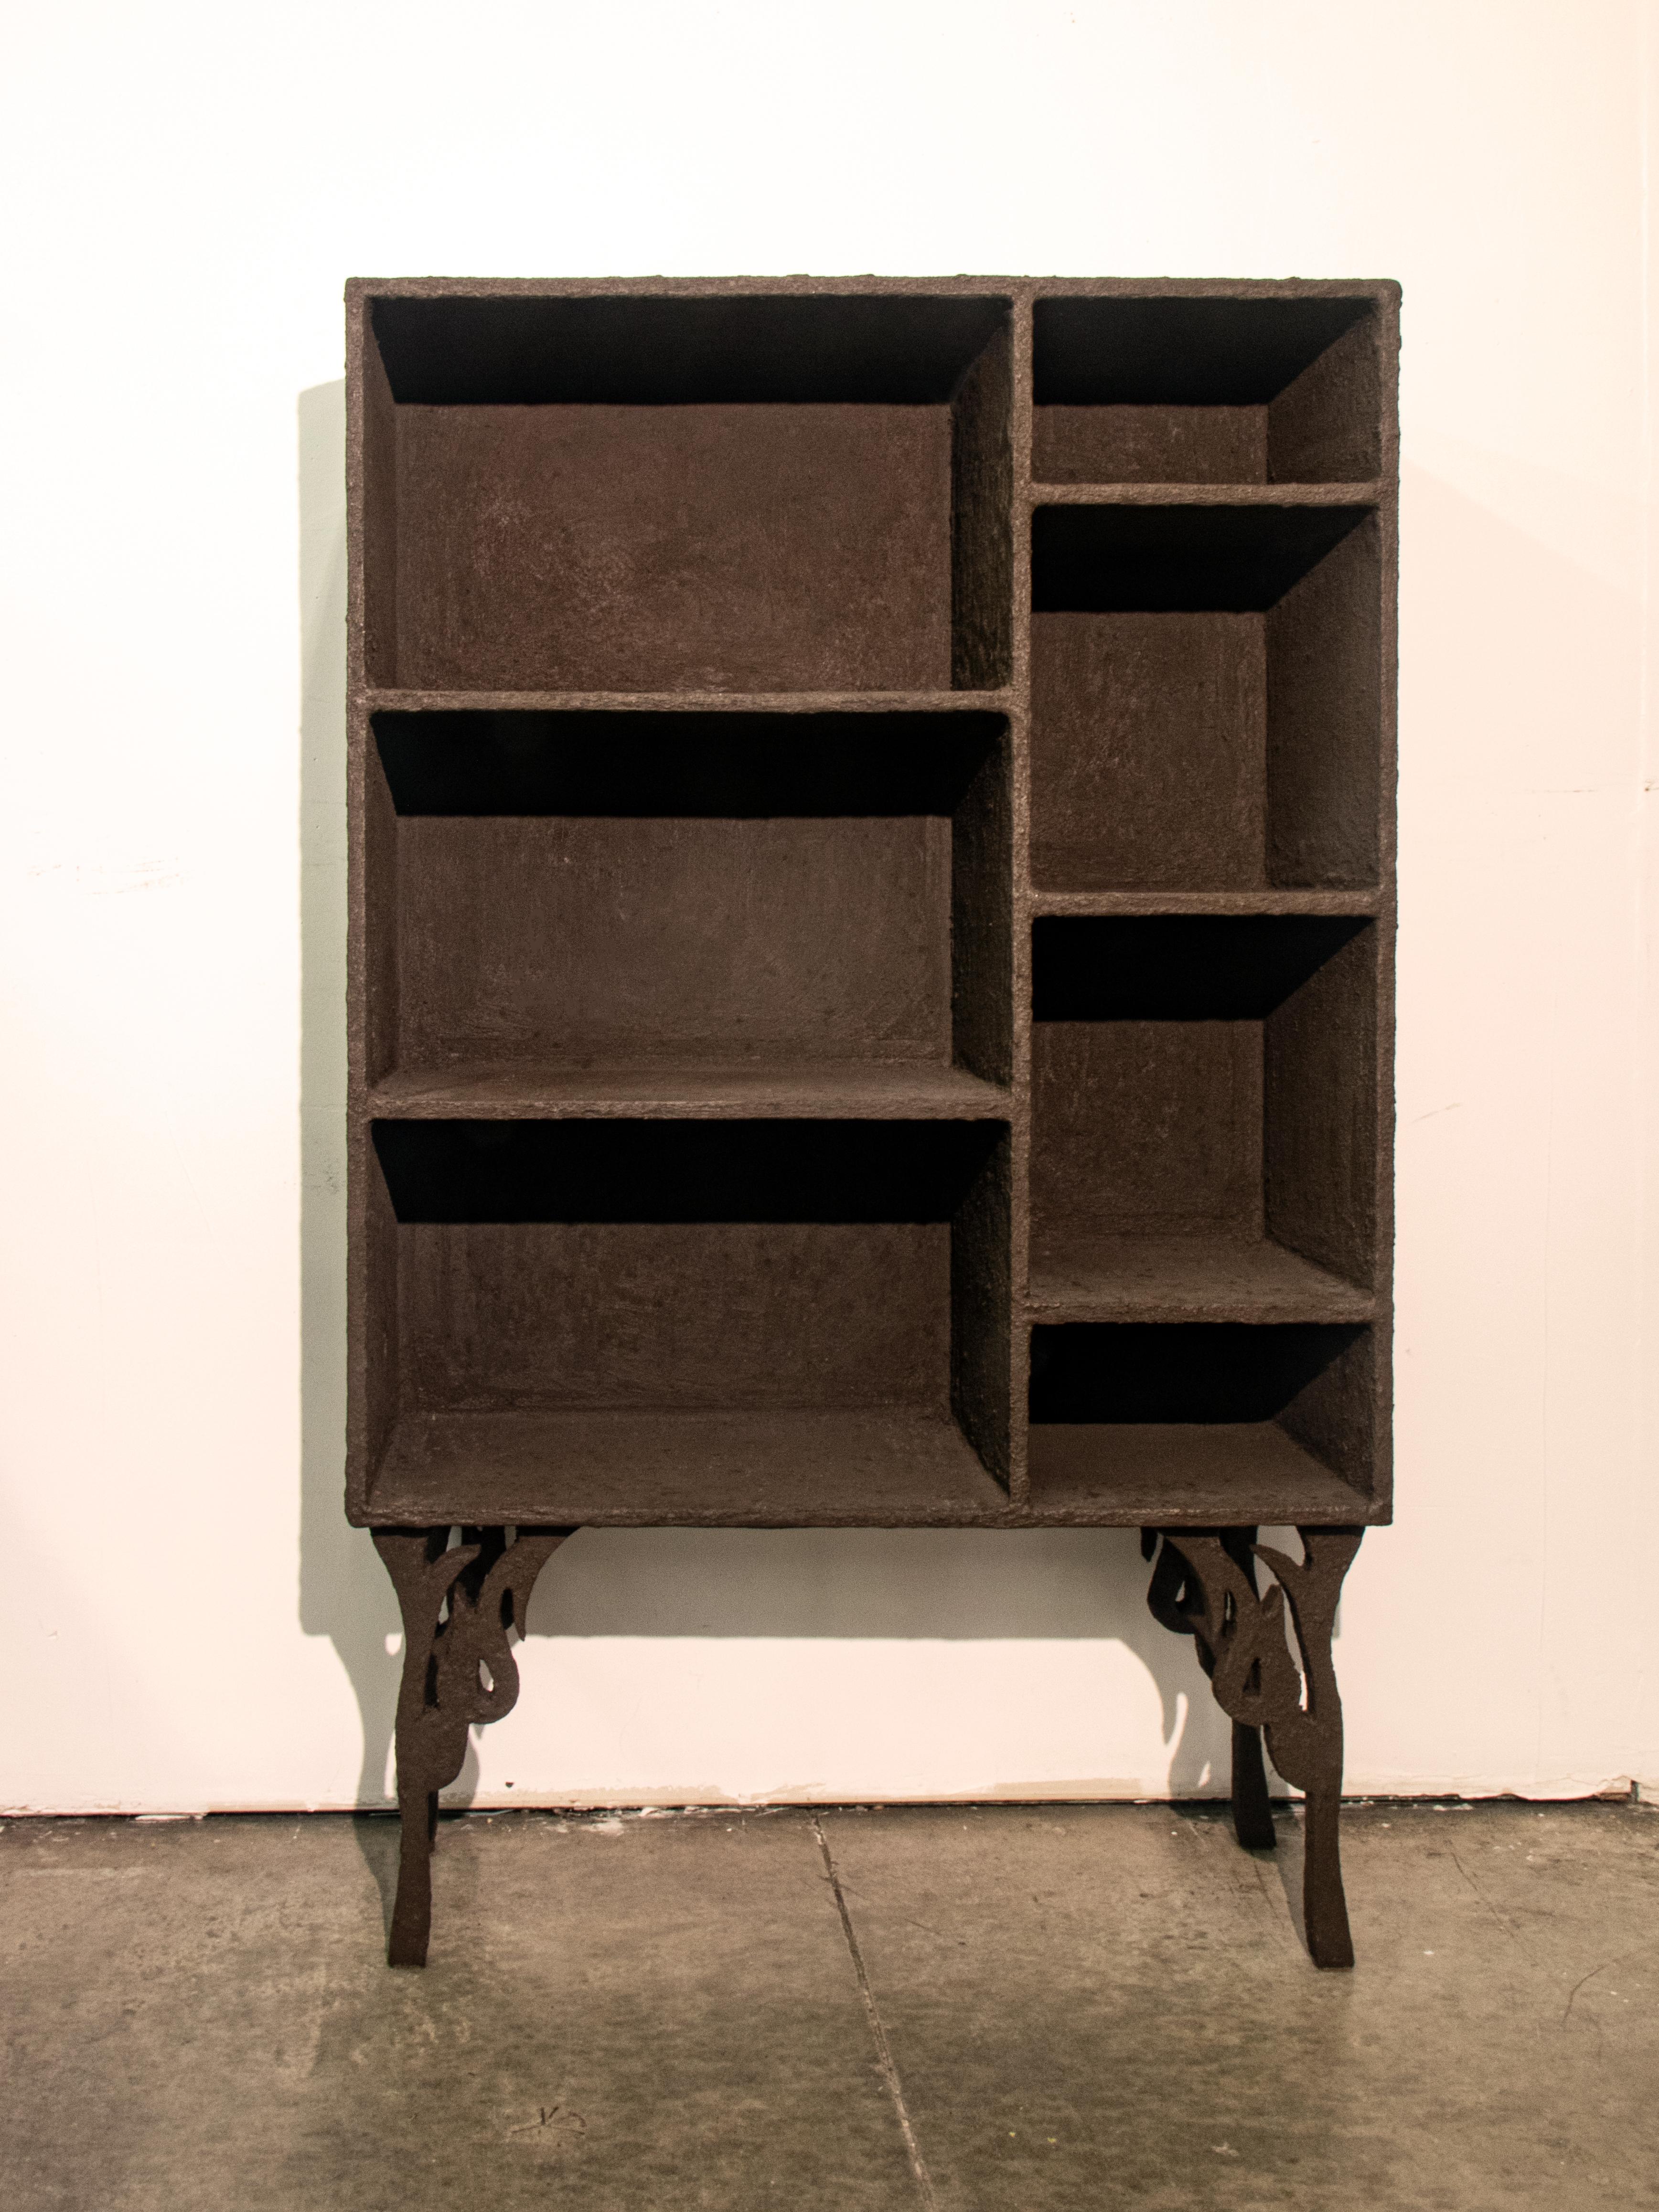 This handmade unique bookcase combines a wooden skeleton with a brown pigmented cement coat. The irregularity of the texture unique to this piece give the bookshelf a rough and spontaneous finish, with the flame shaped legs adding an element of